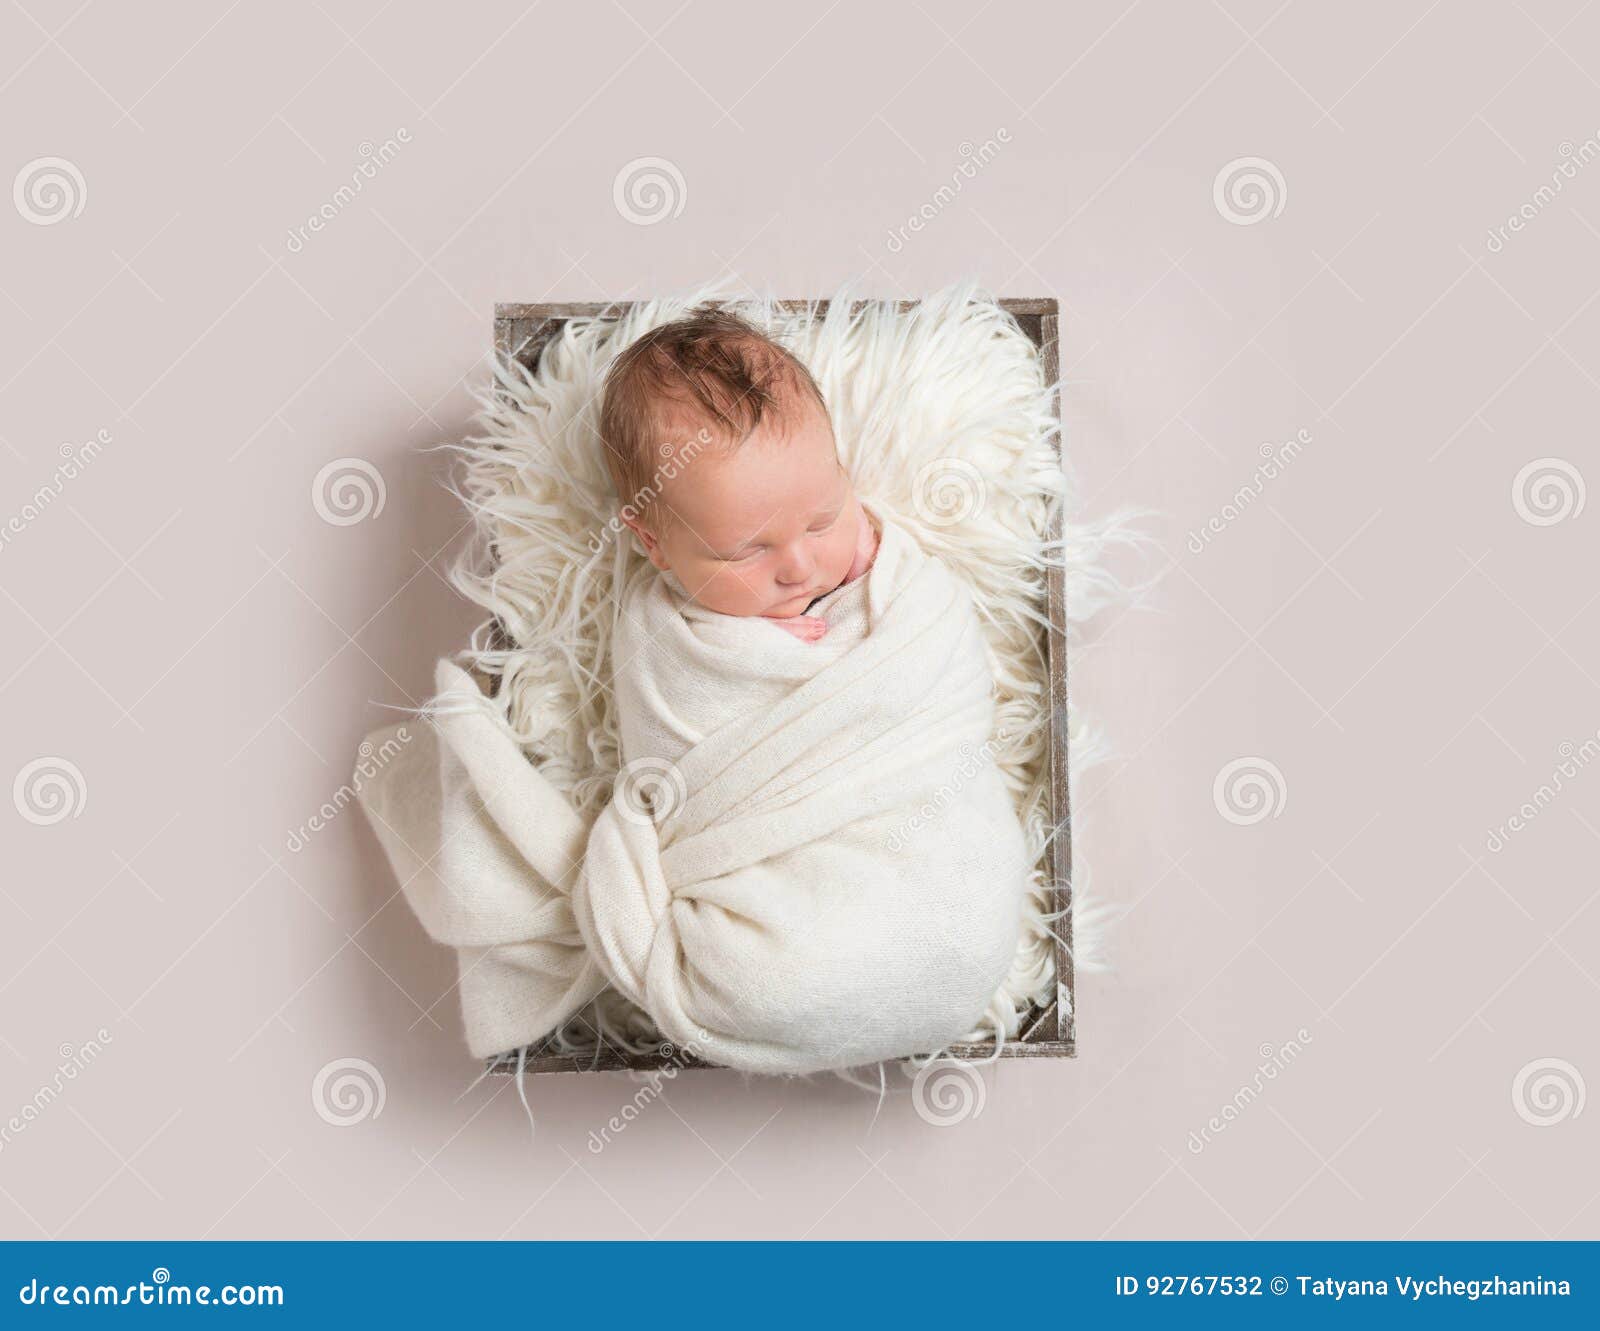 baby napping in basket , wrapped up, topview